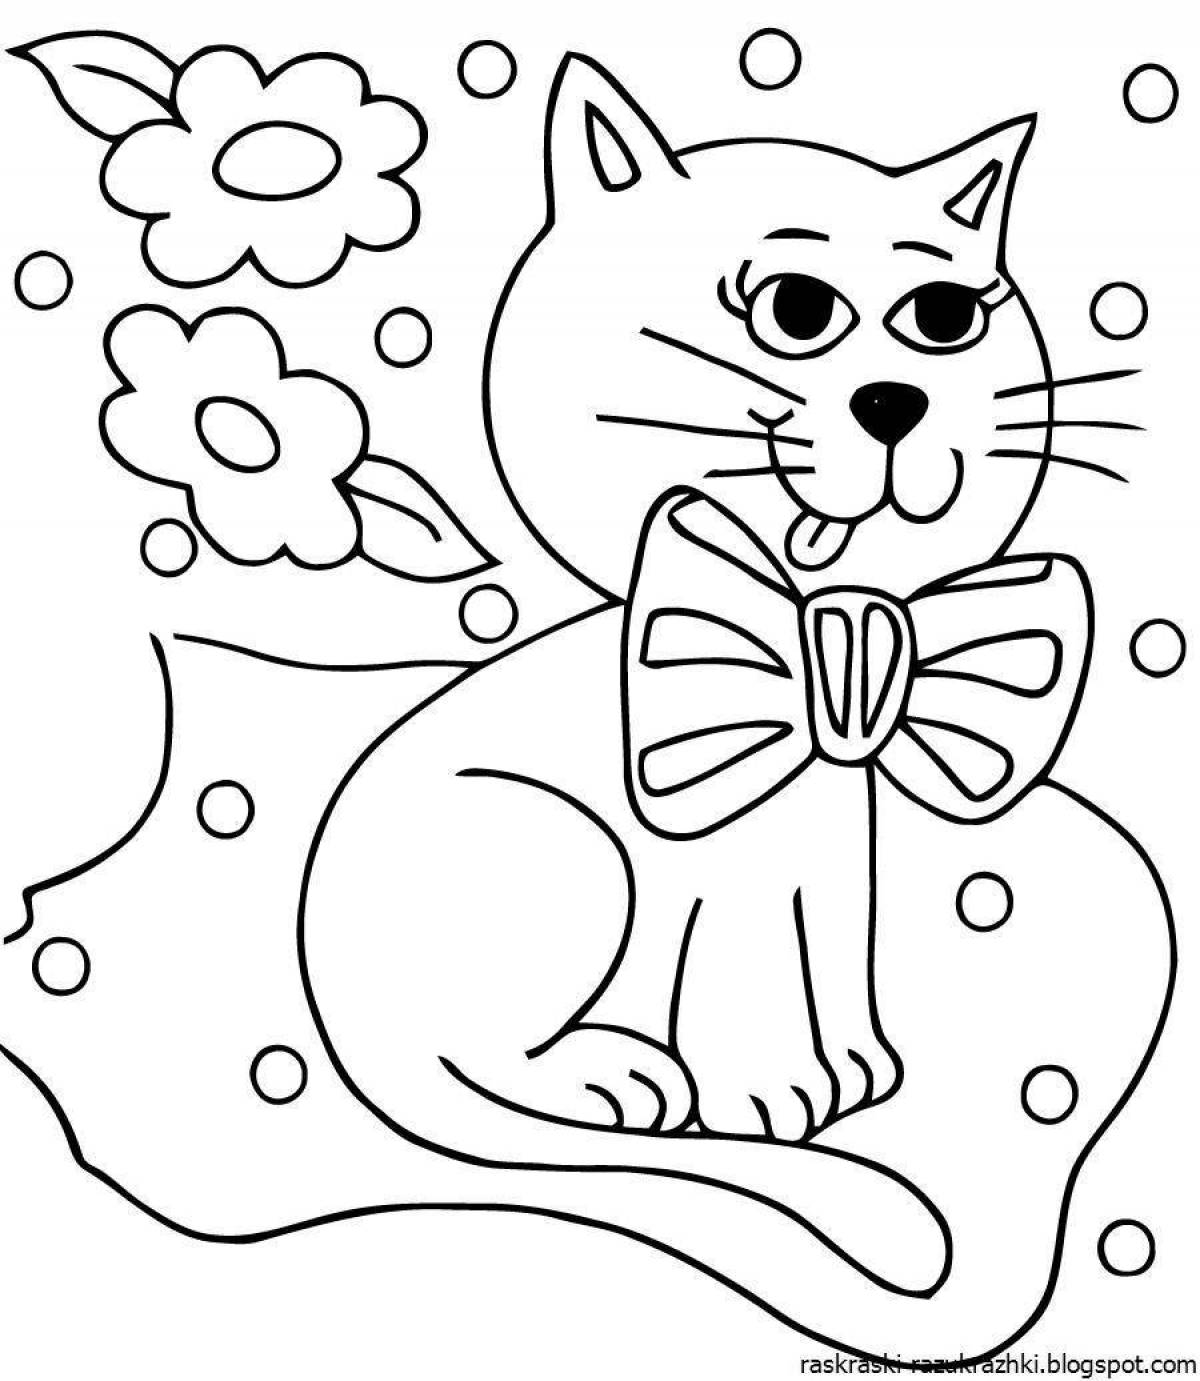 Fluffy cat coloring book for children 4-5 years old